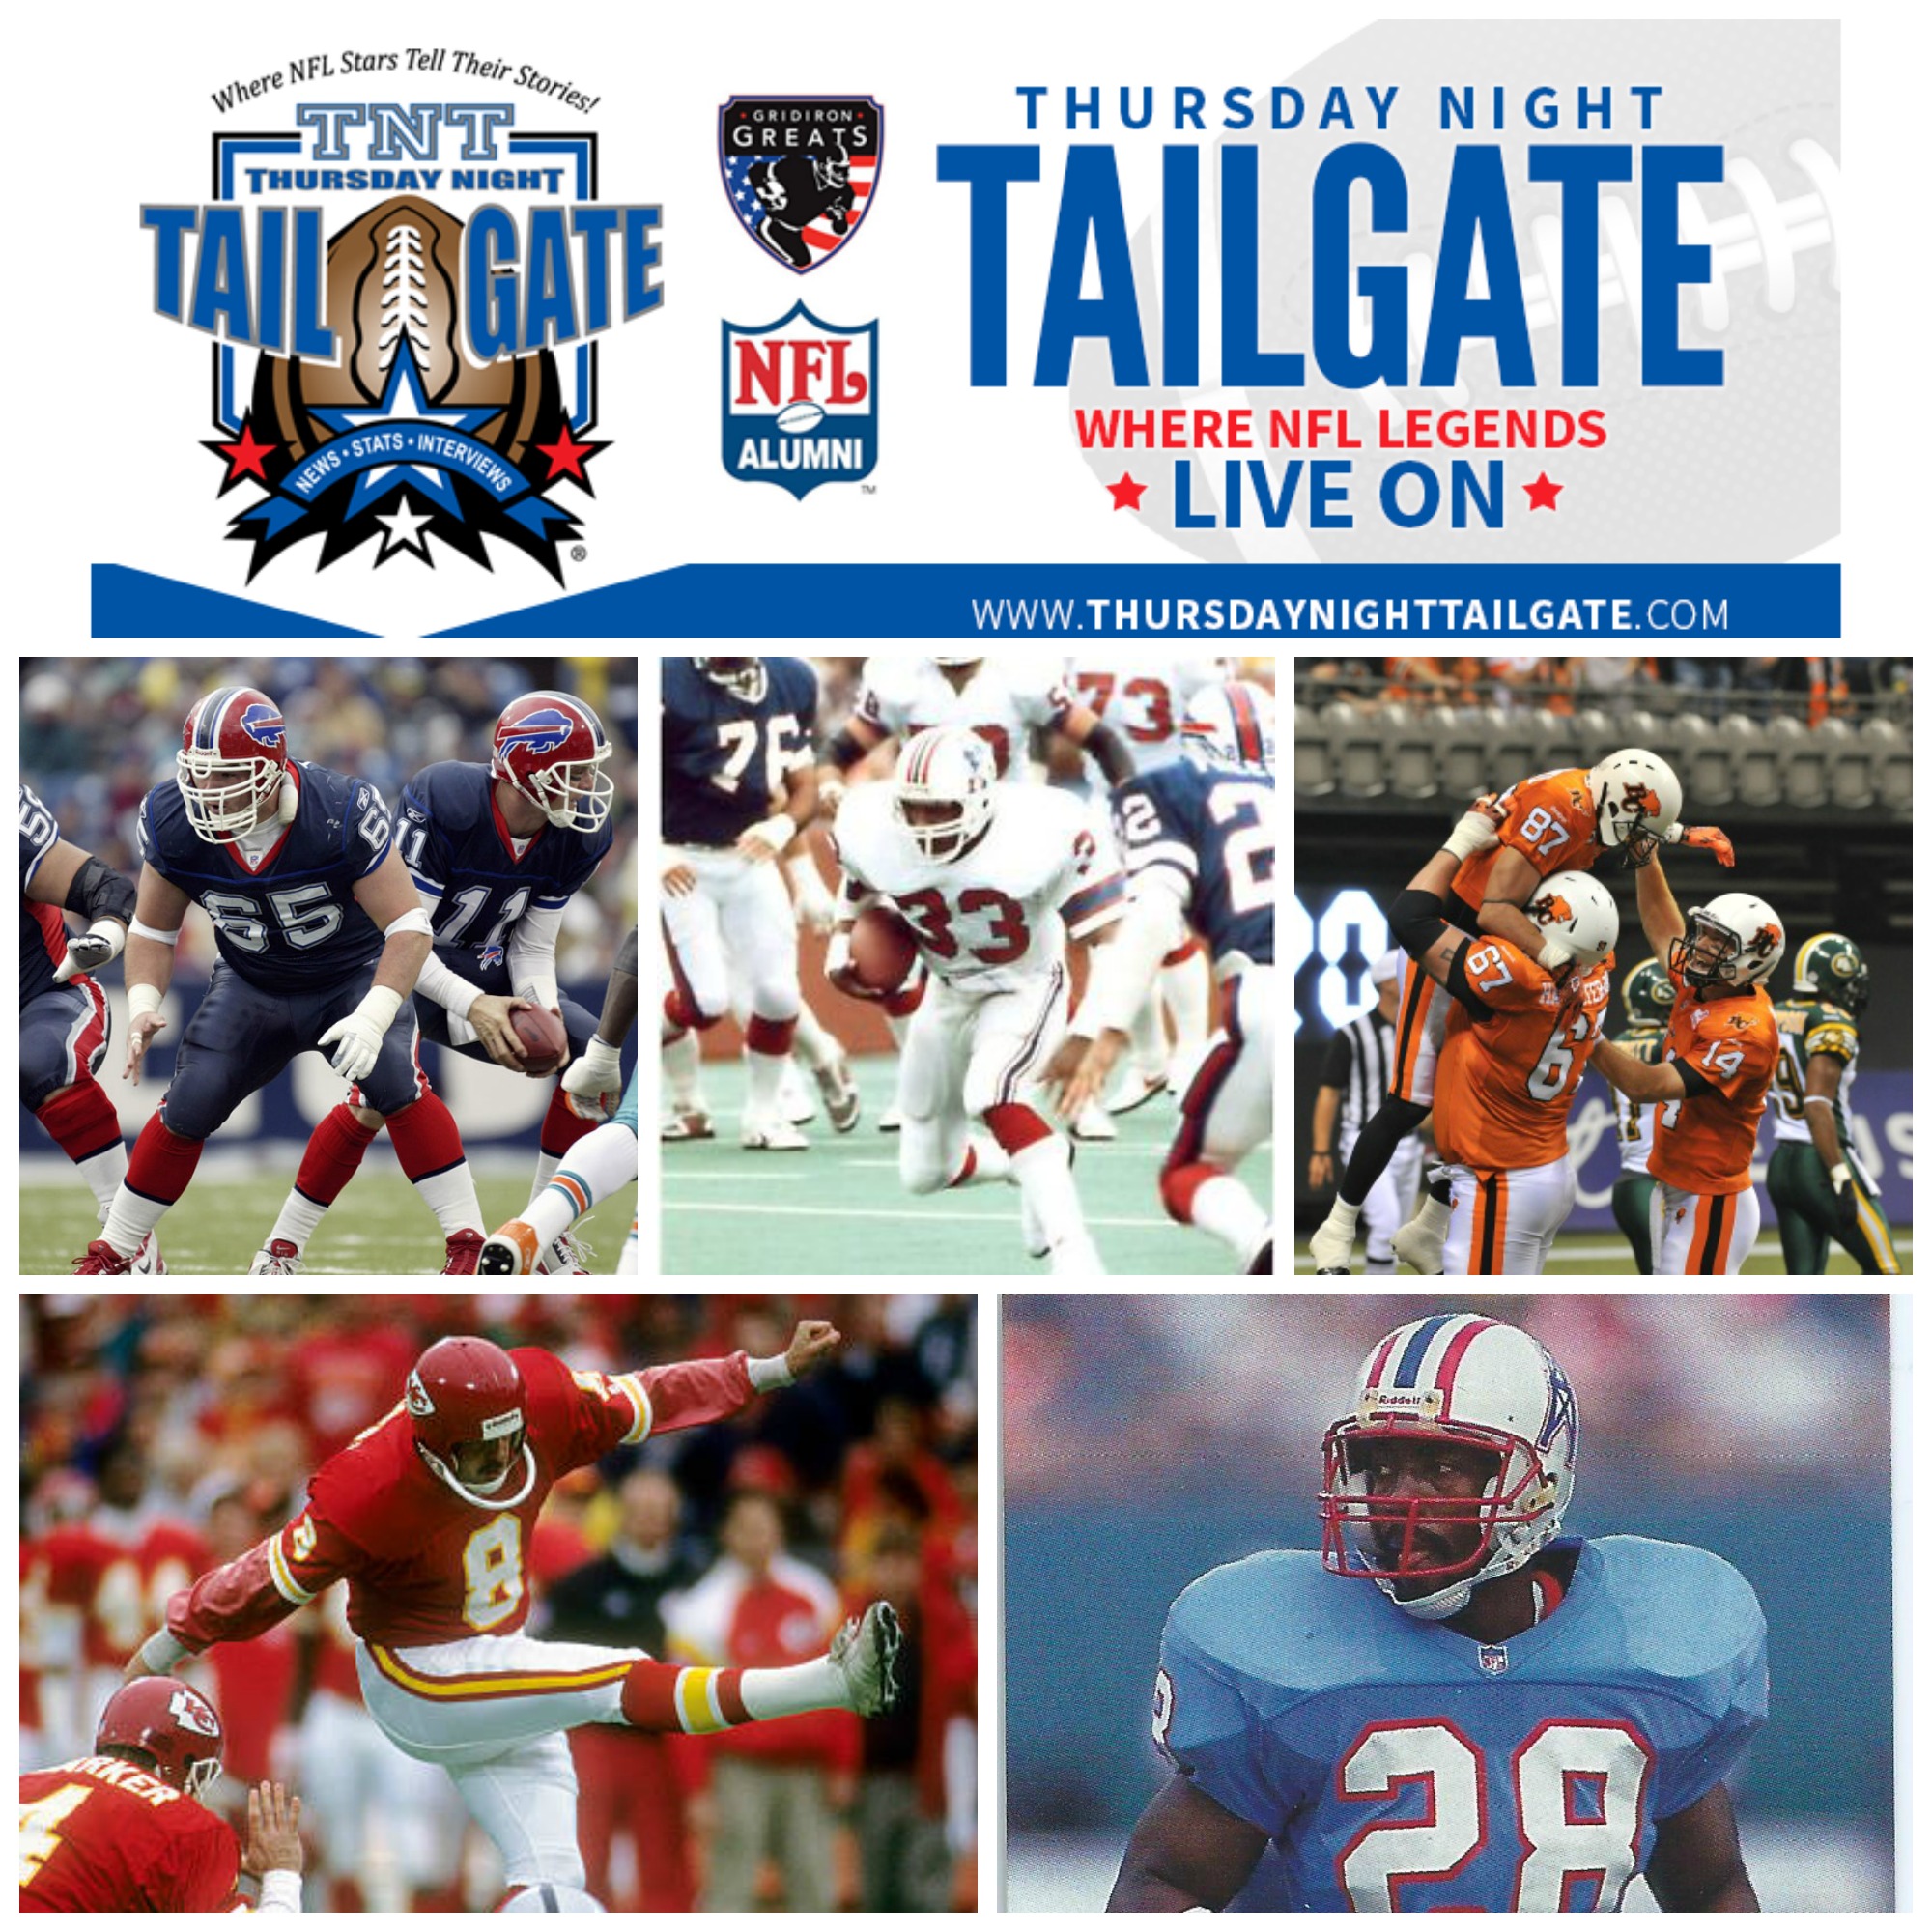 Ross Tucker, Tony Collins, Marco Iannuzzi, Nick Lowery, & Cris Dishman join us on this edition of the Thursday Night Tailgate